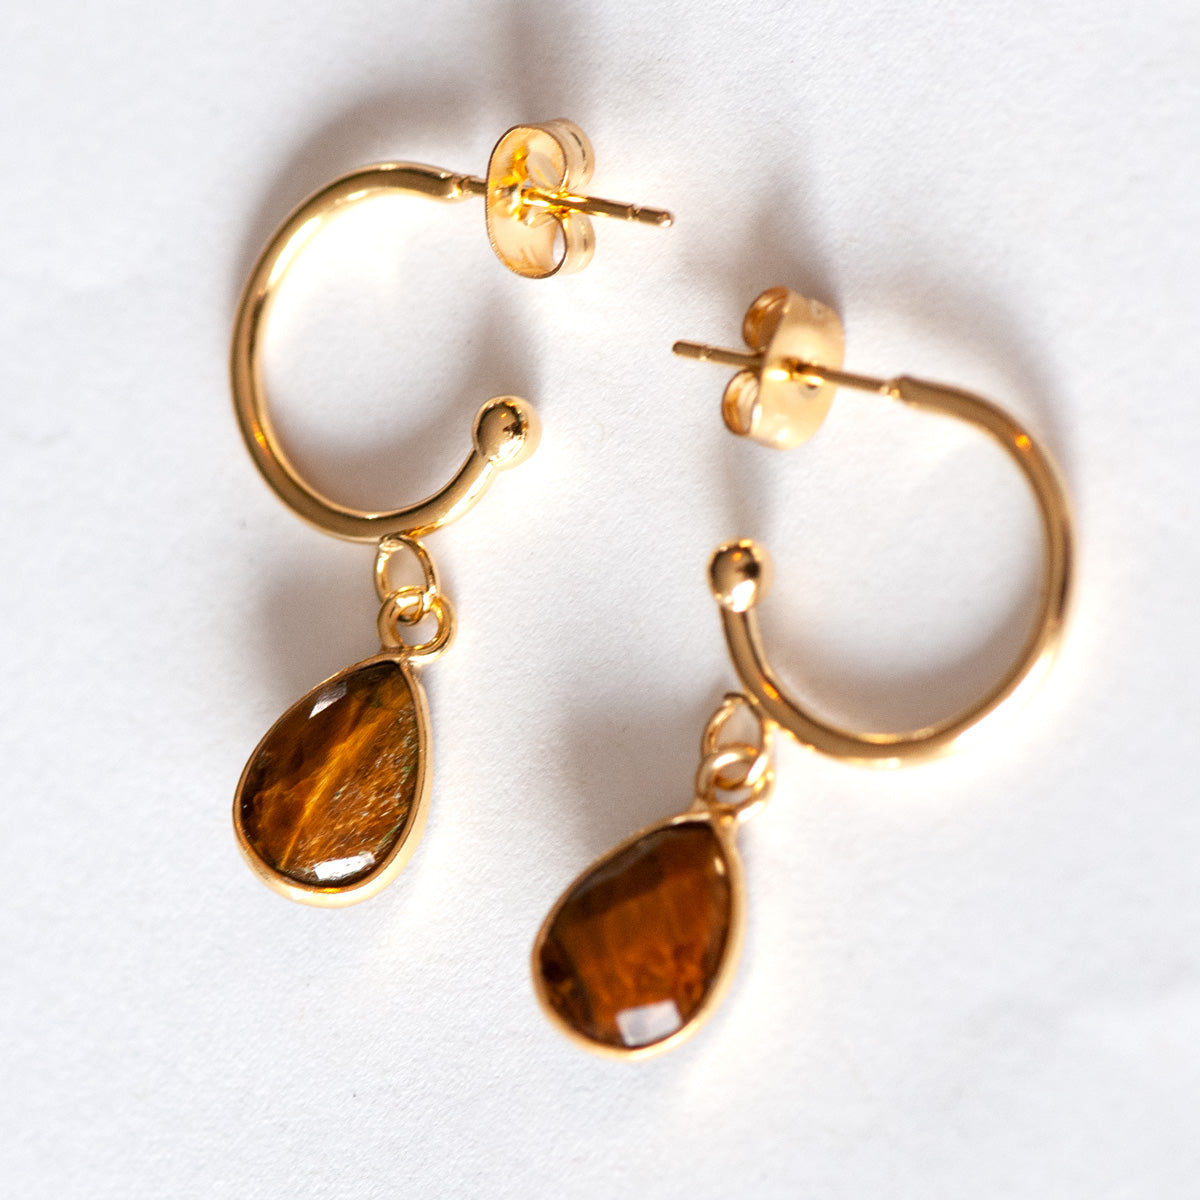 Handmade Tiger's Eye earrings with gold metal accents